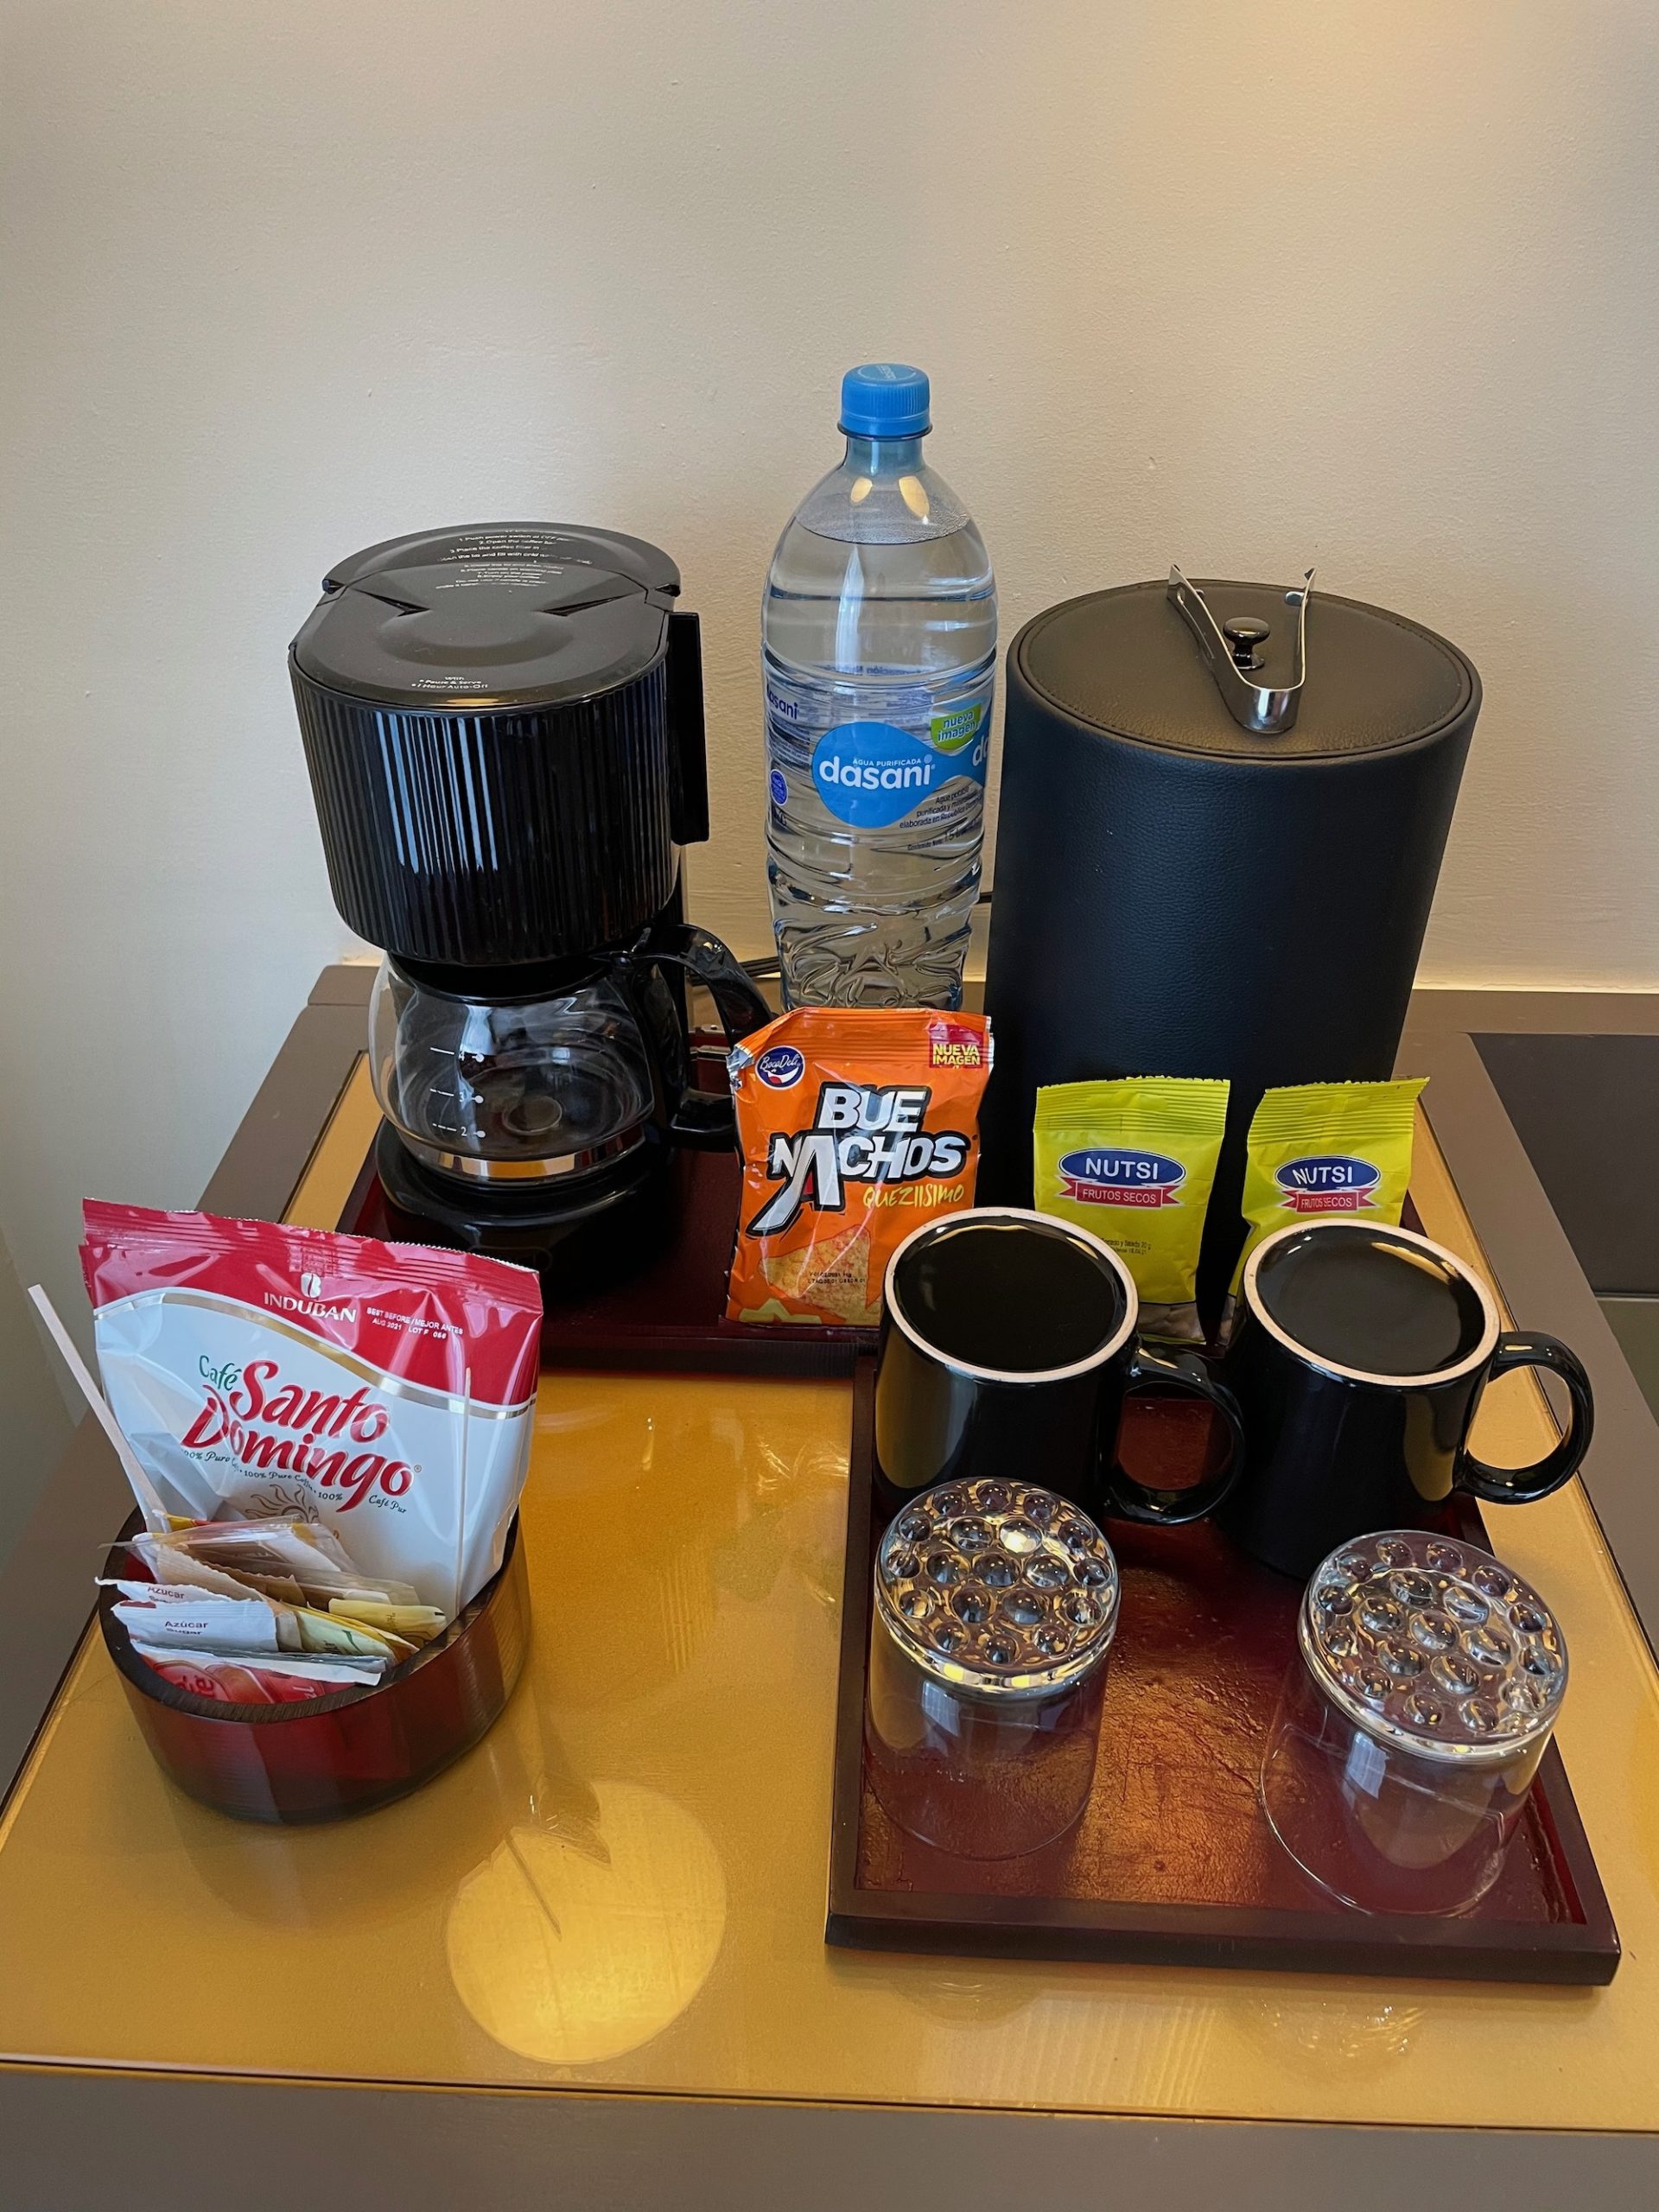 a coffee maker and other items on a table